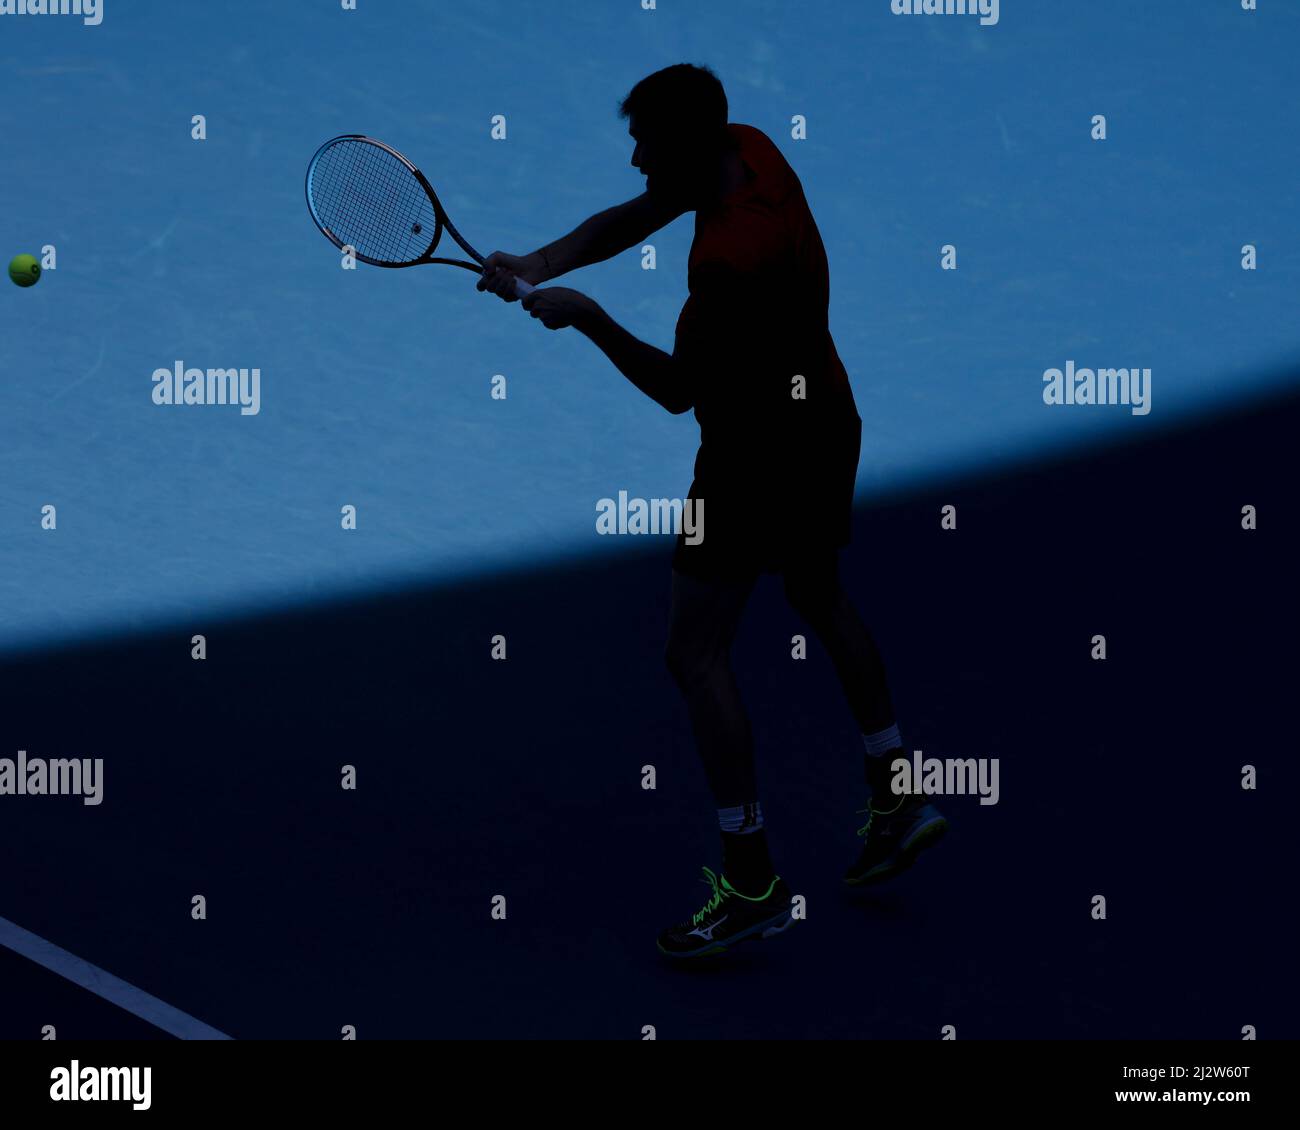 Silhouette of German tennis player Mats Moraing playing a backhand shot during  the Australian Open 2022 tennis tournament, Melbourne Park, Melbourne, Stock Photo